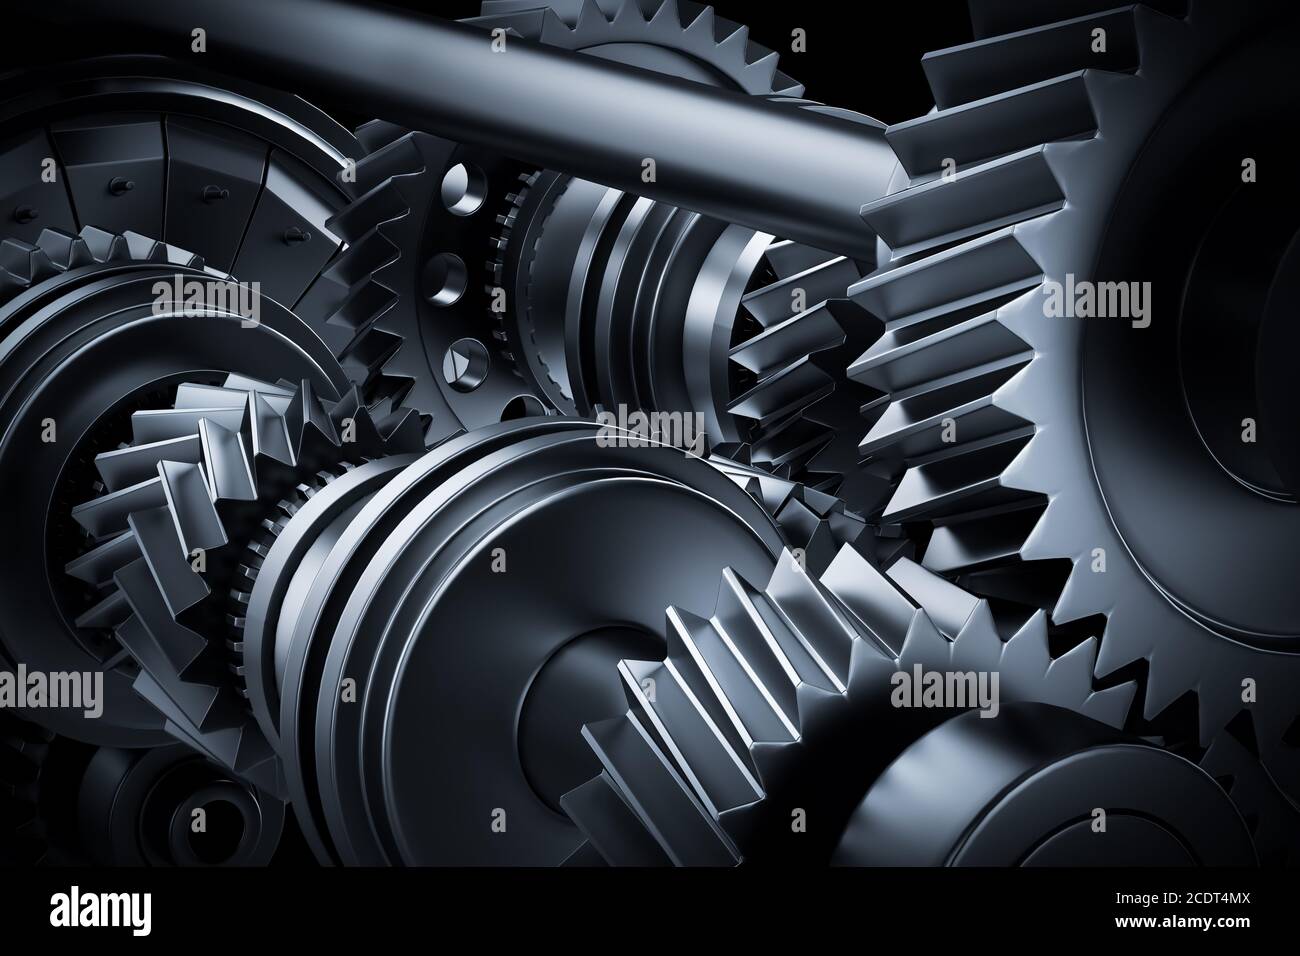 Motor, engine close-up. Gears, cogwheels, real engine elements Stock Photo